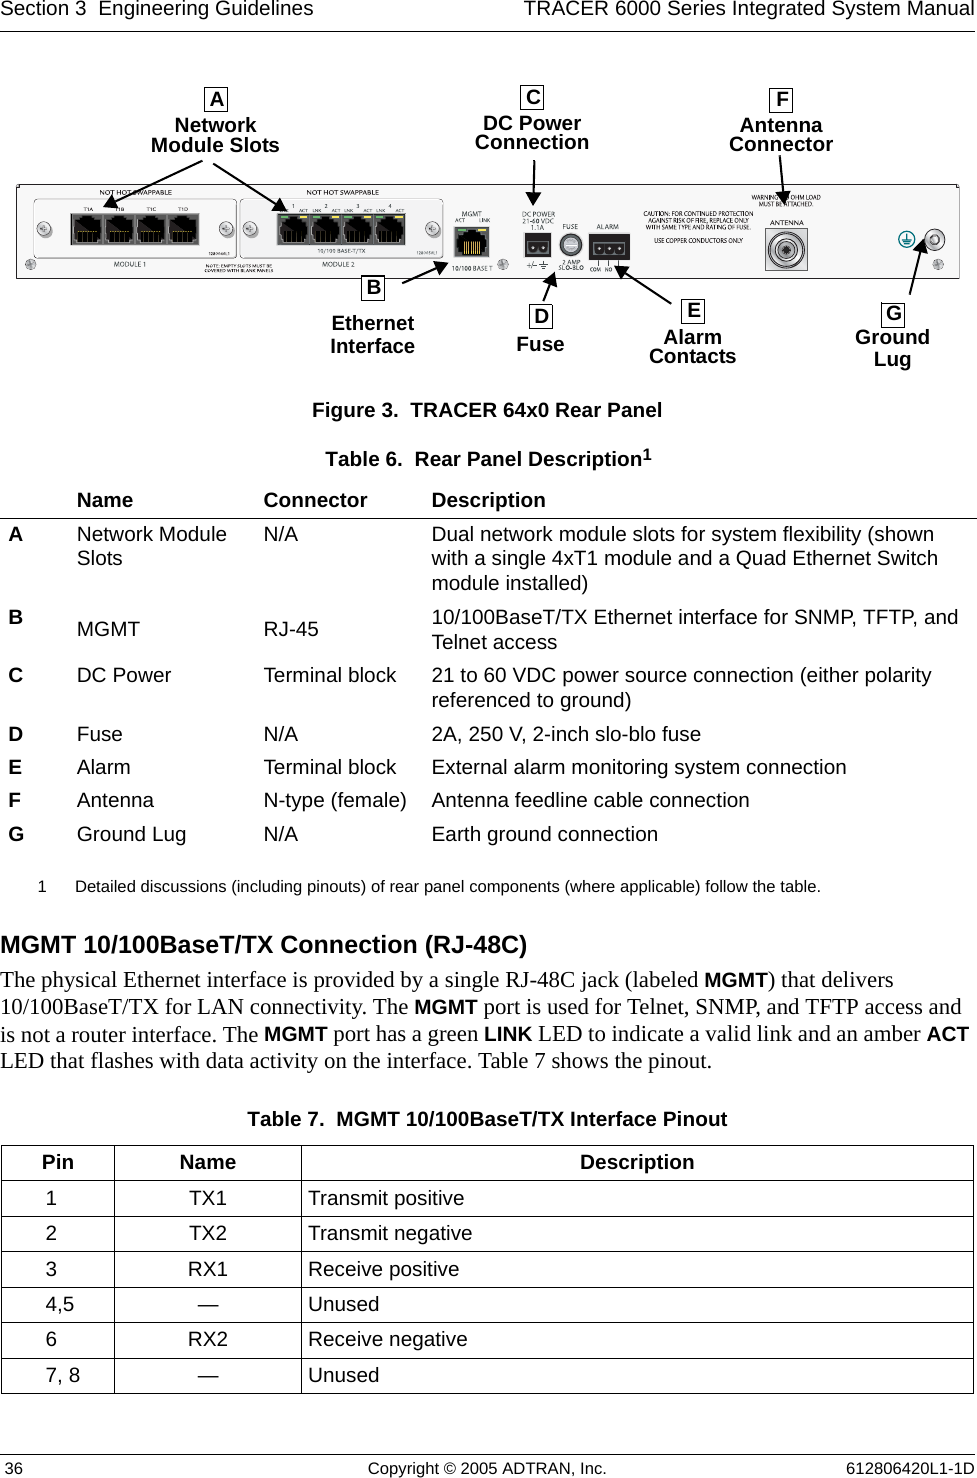 Section 3  Engineering Guidelines TRACER 6000 Series Integrated System Manual 36 Copyright © 2005 ADTRAN, Inc. 612806420L1-1DFigure 3.  TRACER 64x0 Rear PanelMGMT 10/100BaseT/TX Connection (RJ-48C)The physical Ethernet interface is provided by a single RJ-48C jack (labeled MGMT) that delivers 10/100BaseT/TX for LAN connectivity. The MGMT port is used for Telnet, SNMP, and TFTP access and is not a router interface. The MGMT port has a green LINK LED to indicate a valid link and an amber ACT LED that flashes with data activity on the interface. Table 7 shows the pinout.Table 6.  Rear Panel Description11 Detailed discussions (including pinouts) of rear panel components (where applicable) follow the table.Name Connector DescriptionANetwork Module Slots N/A Dual network module slots for system flexibility (shown with a single 4xT1 module and a Quad Ethernet Switch module installed)BMGMT RJ-45 10/100BaseT/TX Ethernet interface for SNMP, TFTP, and Telnet accessCDC Power Terminal block 21 to 60 VDC power source connection (either polarity referenced to ground)DFuse N/A 2A, 250 V, 2-inch slo-blo fuseEAlarm Terminal block External alarm monitoring system connectionFAntenna N-type (female) Antenna feedline cable connectionGGround Lug N/A Earth ground connectionTable 7.  MGMT 10/100BaseT/TX Interface Pinout Pin Name Description1TX1 Transmit positive2TX2 Transmit negative3RX1 Receive positive4,5 —Unused6RX2 Receive negative7, 8 —UnusedAntennaDC PowerConnection ConnectorGroundLugFuse AlarmContactsCFBEDGEthernetInterfaceNetworkModule SlotsA